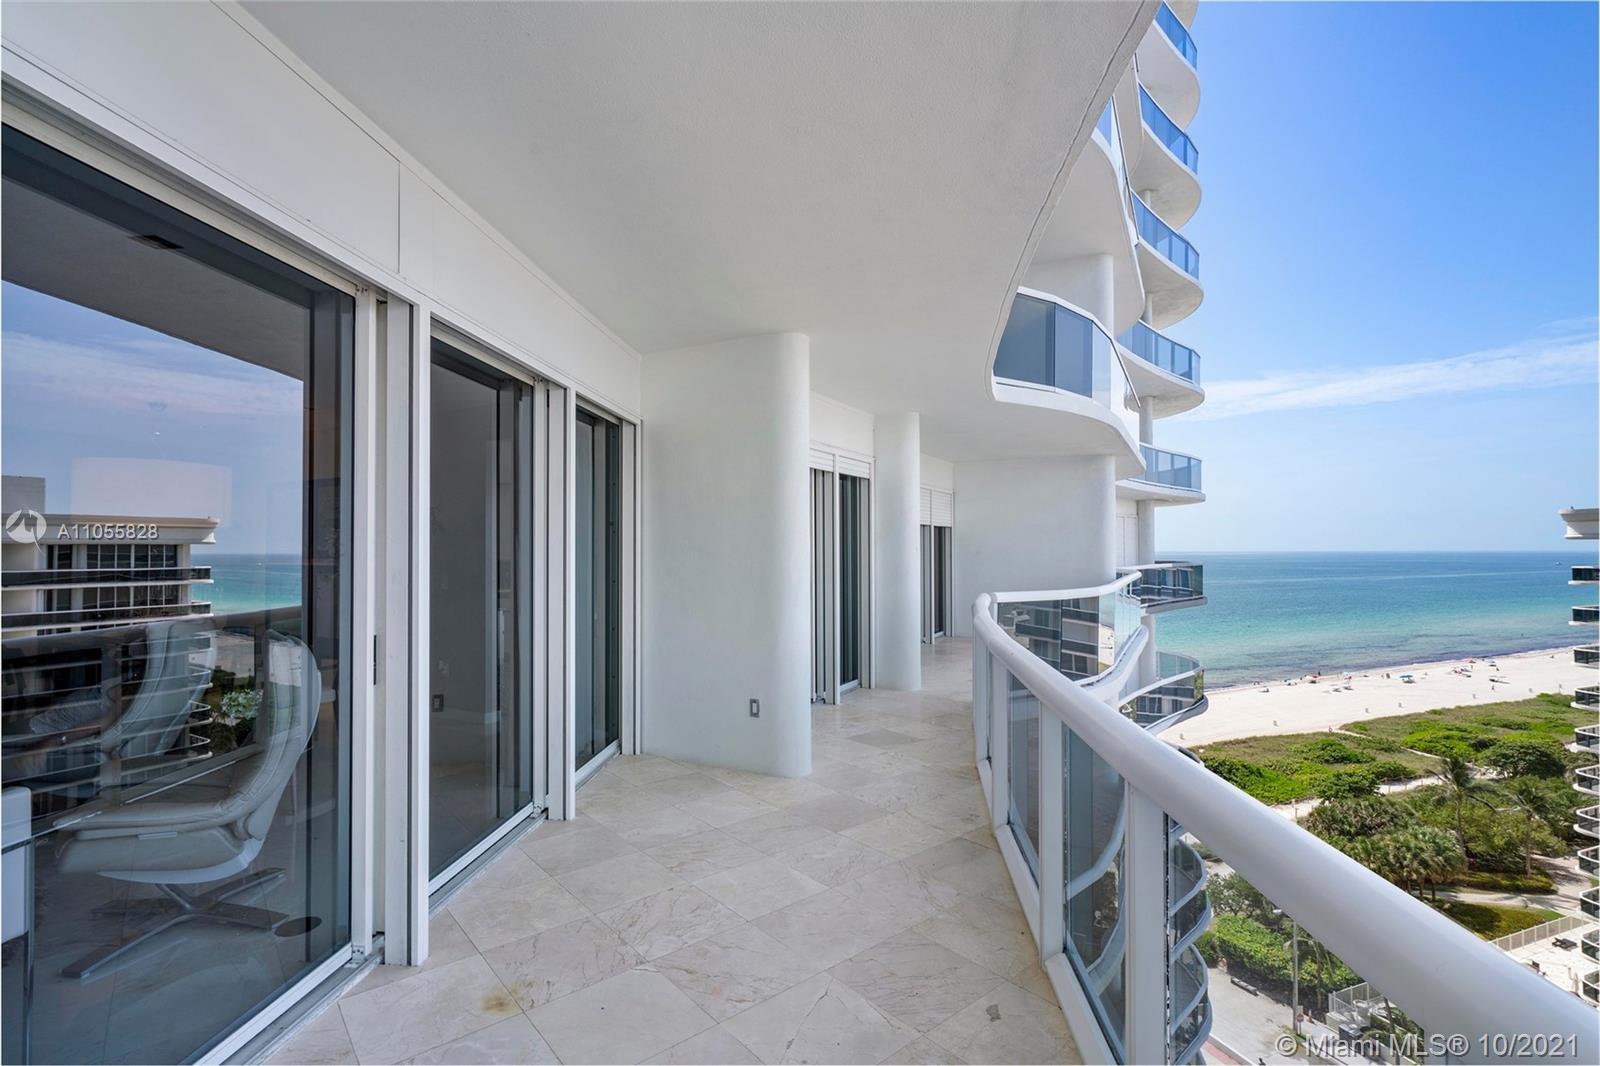 Photo 1 of Majestic Tower Apt 1208 in Bal Harbour - MLS A11055828